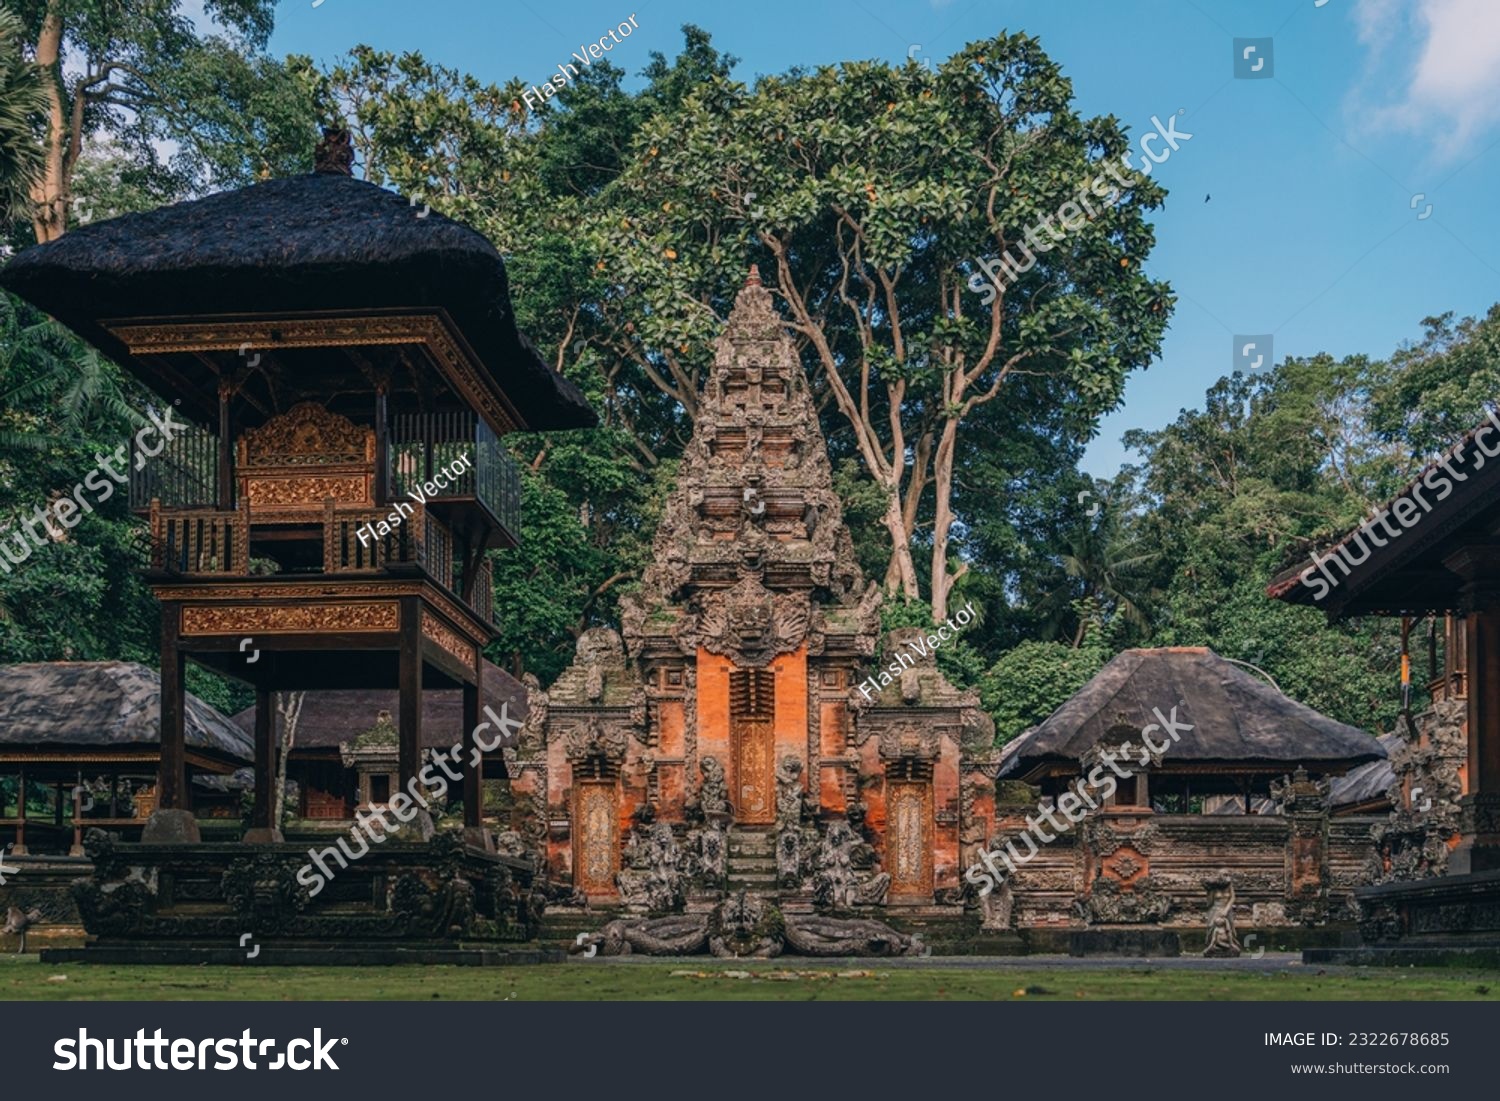 Temple in ubud sacred monkey forest sanctuary. Balinese traditional architecture, hindu temple in ubud city #2322678685